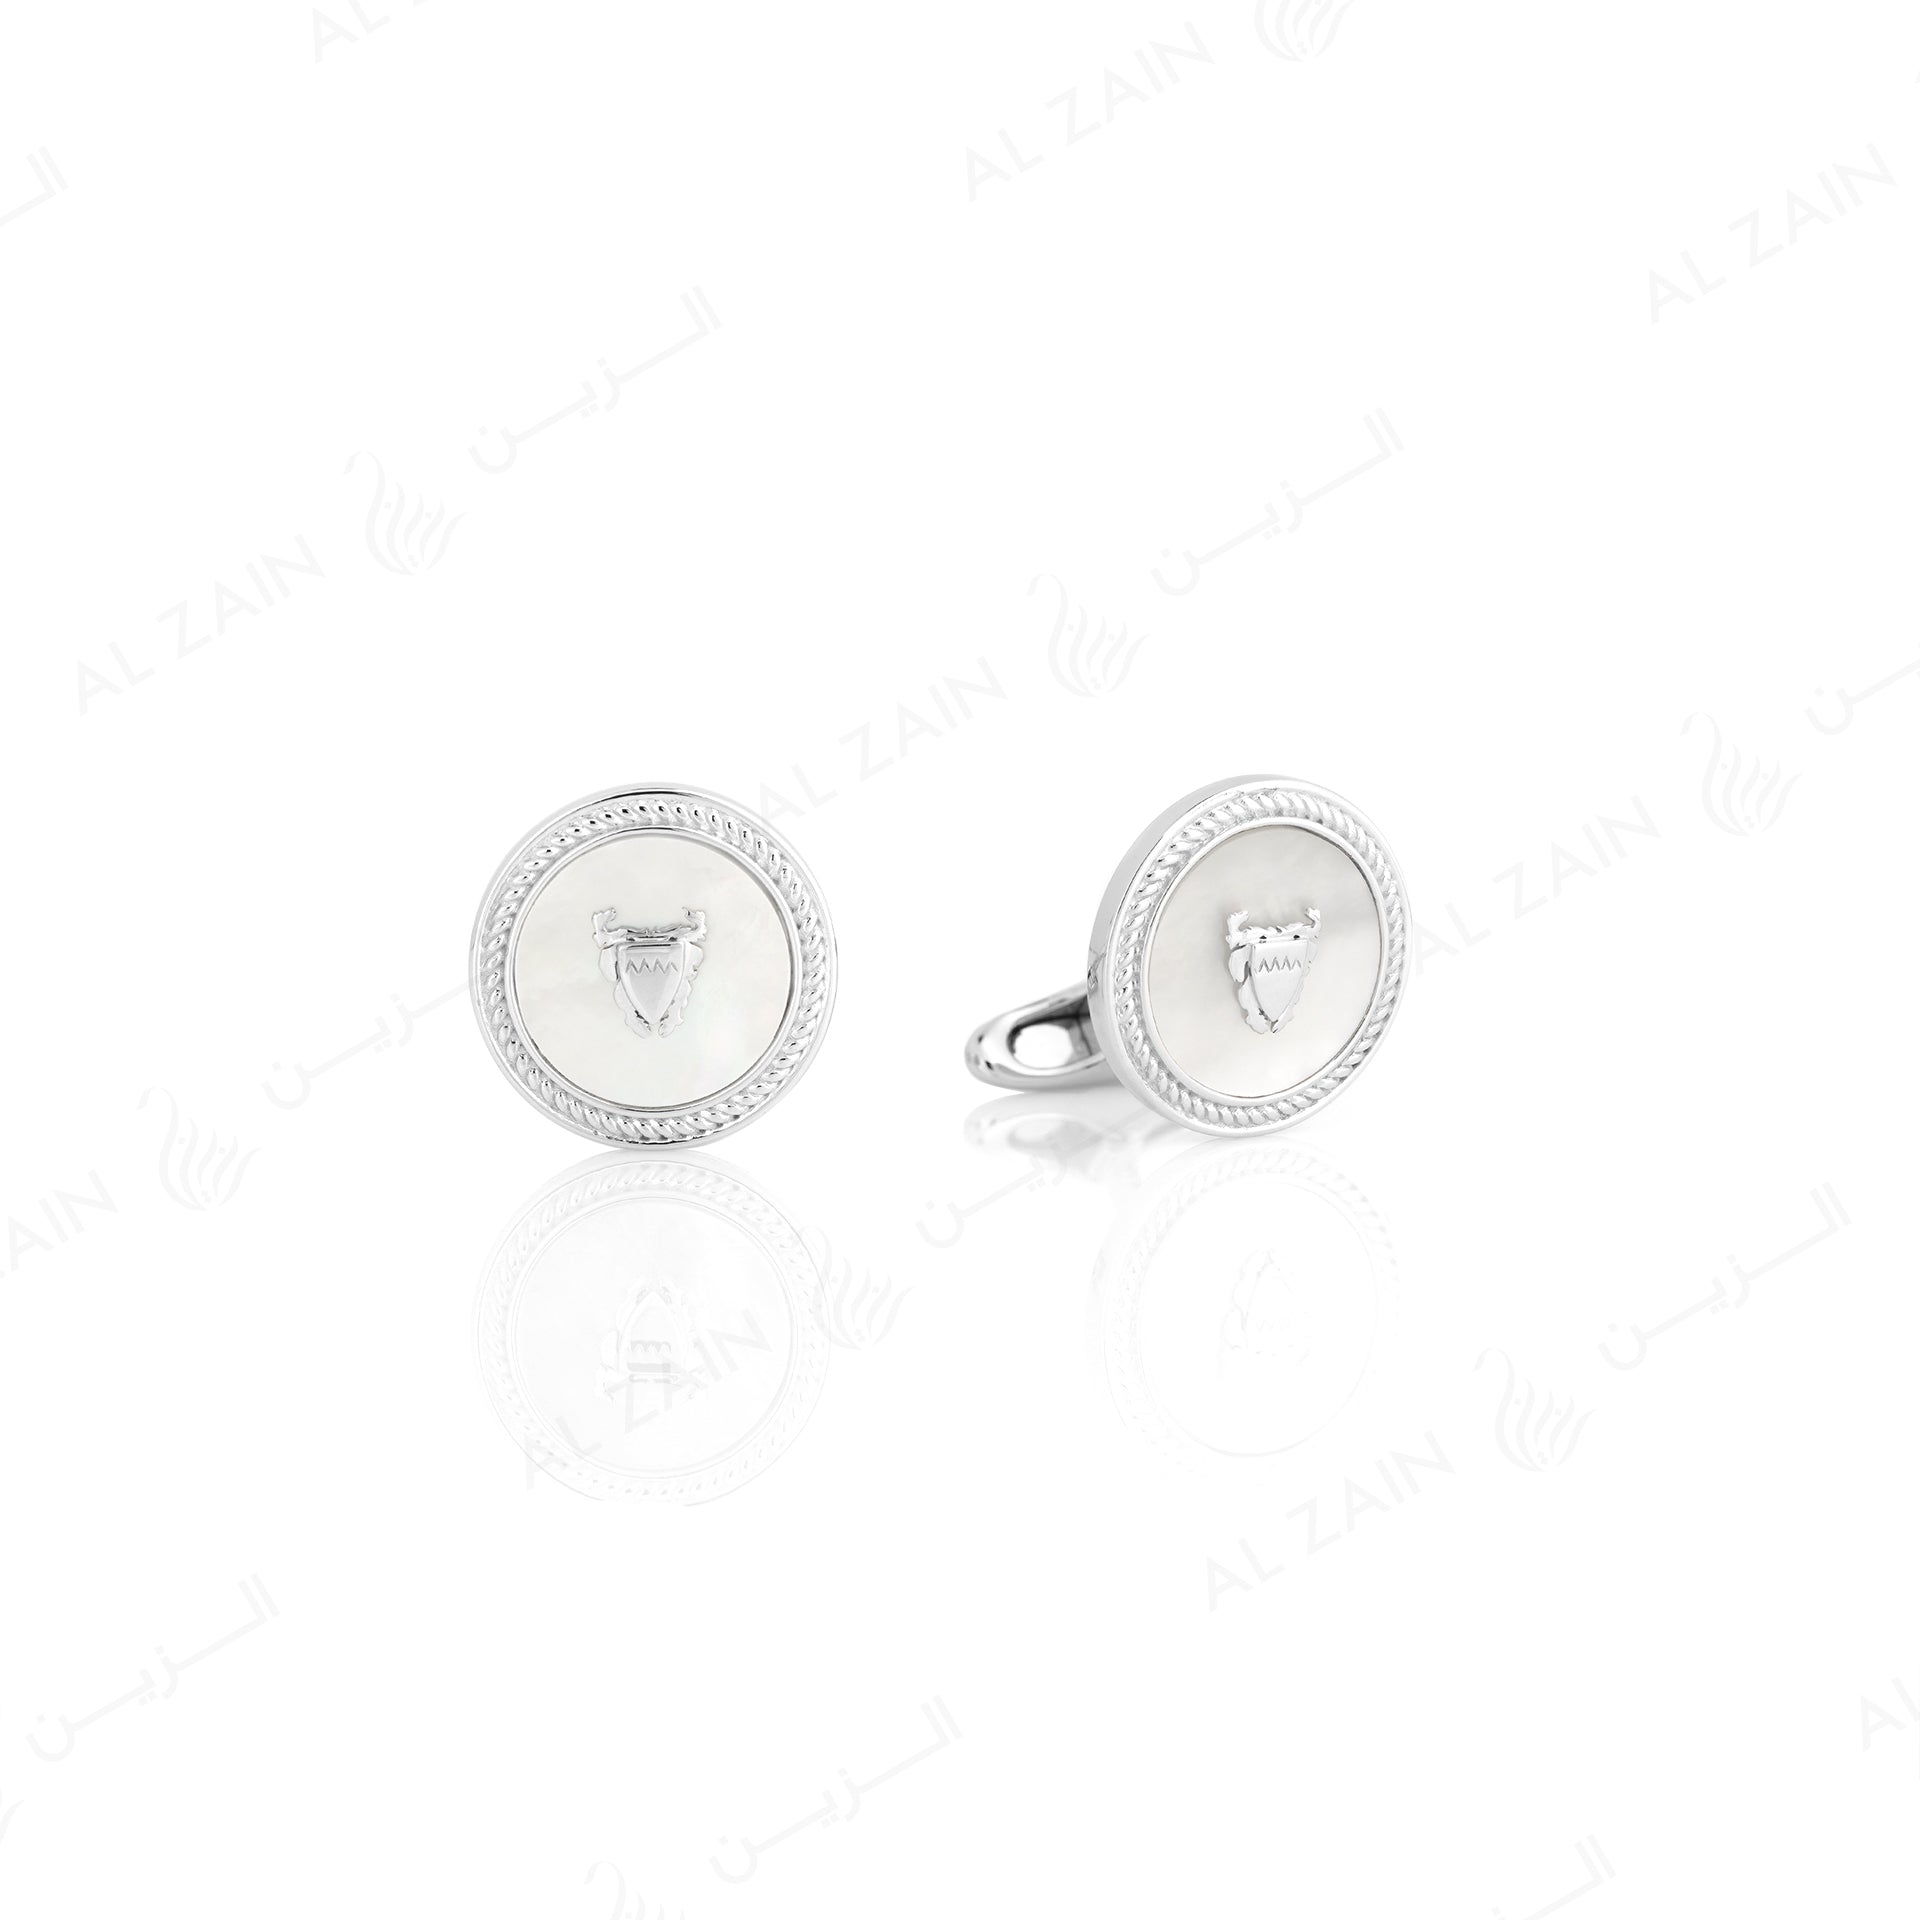 Bahrain flag Cufflinks for Men with Mother of Pearl stone